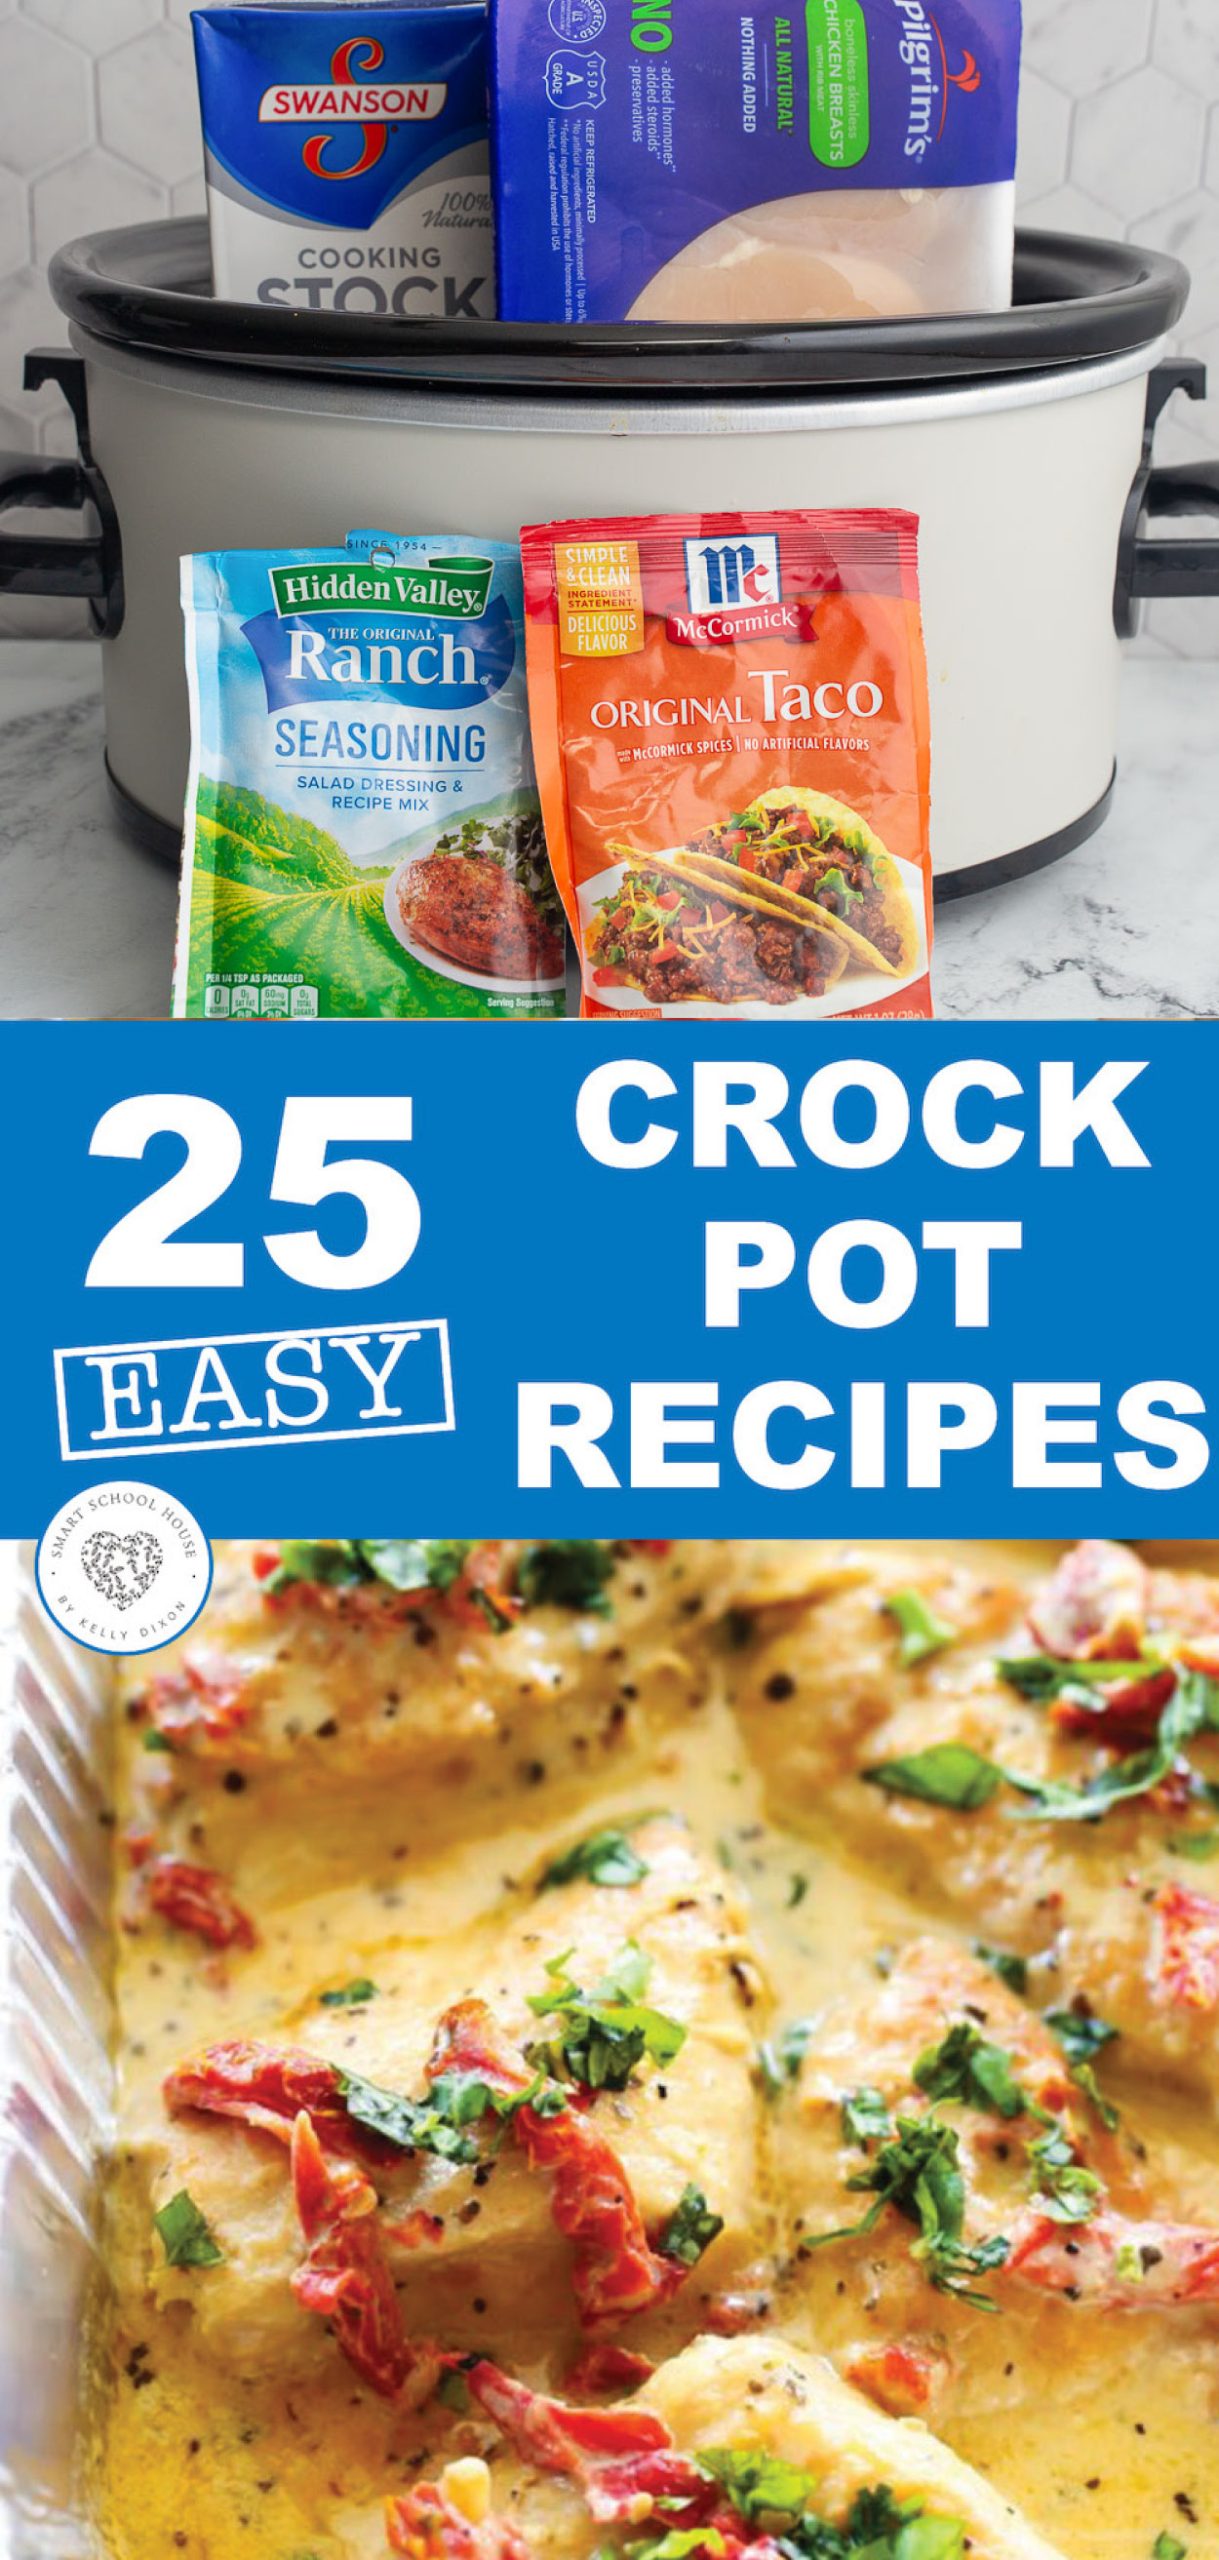 Find our top-rated collection of crock pot recipes for chicken, pork, sandwich fillings, pot roasts, chili, stews, main dishes, sides, desserts and more. 